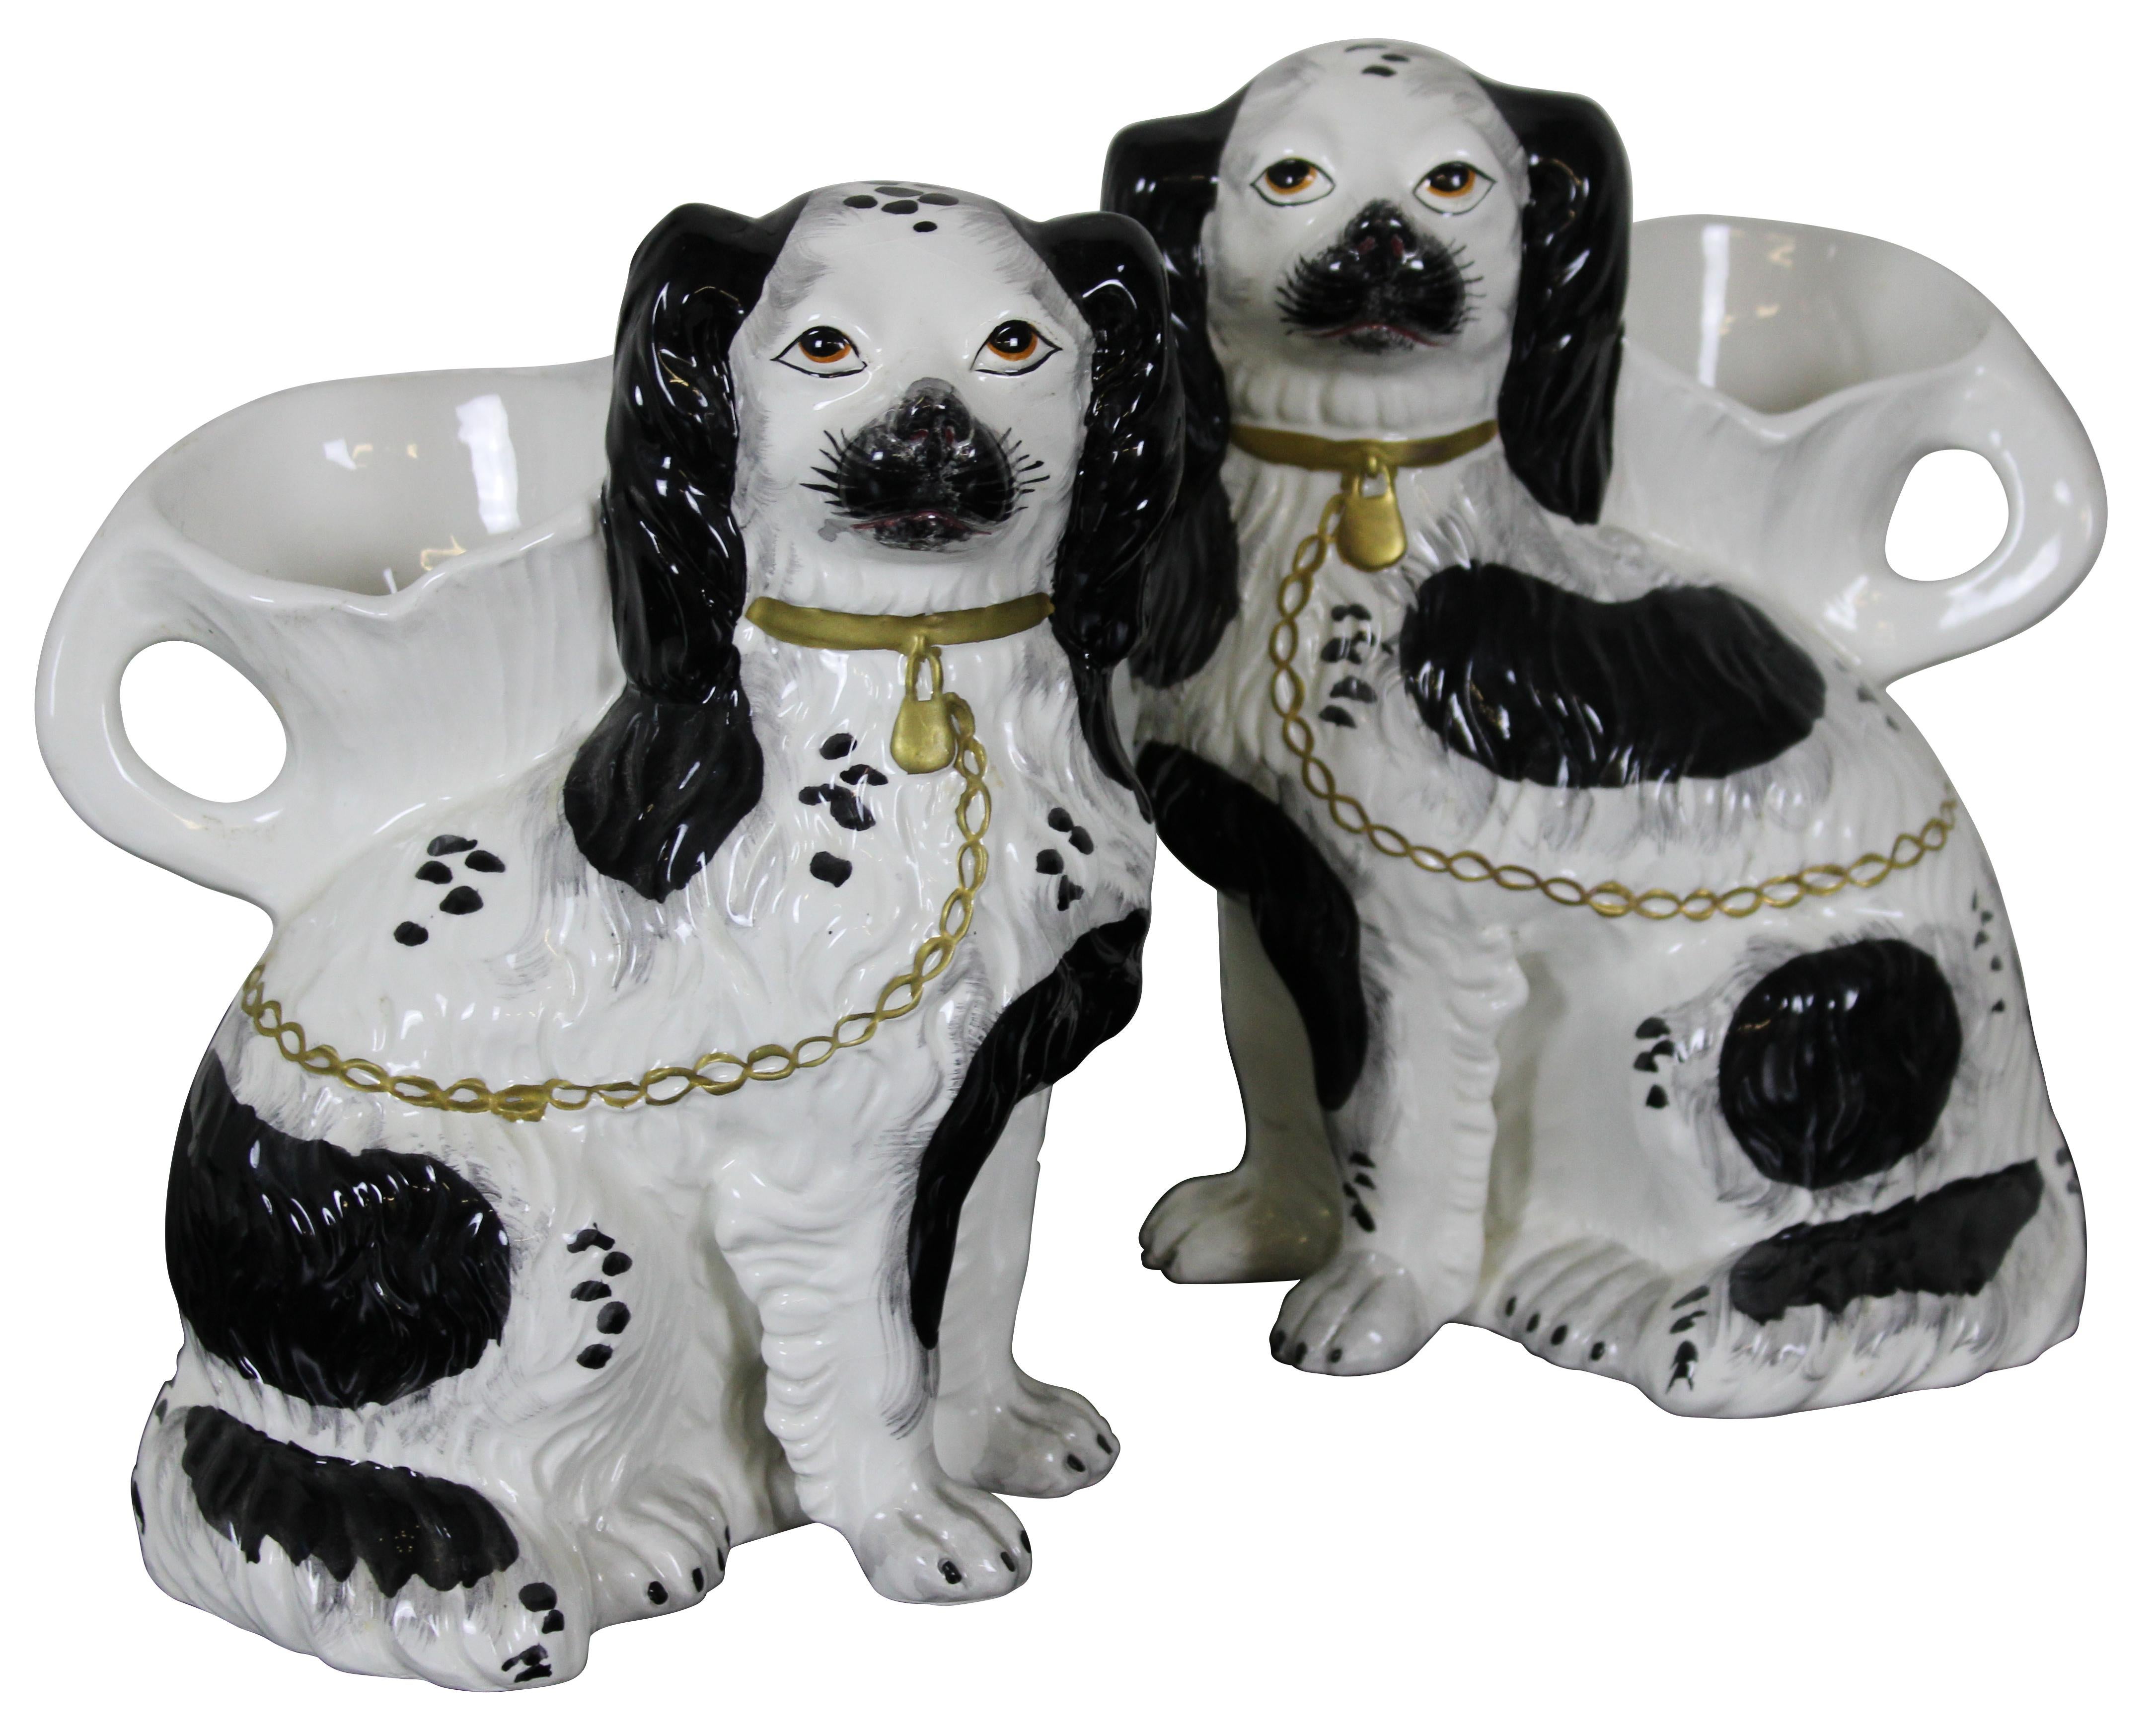 Pair of reproduction Staffordshire style porcelain mantel vases by Chelsea House, Port Royal, in the shape of black and white King Charles Spaniels with gold chain leashes.
   